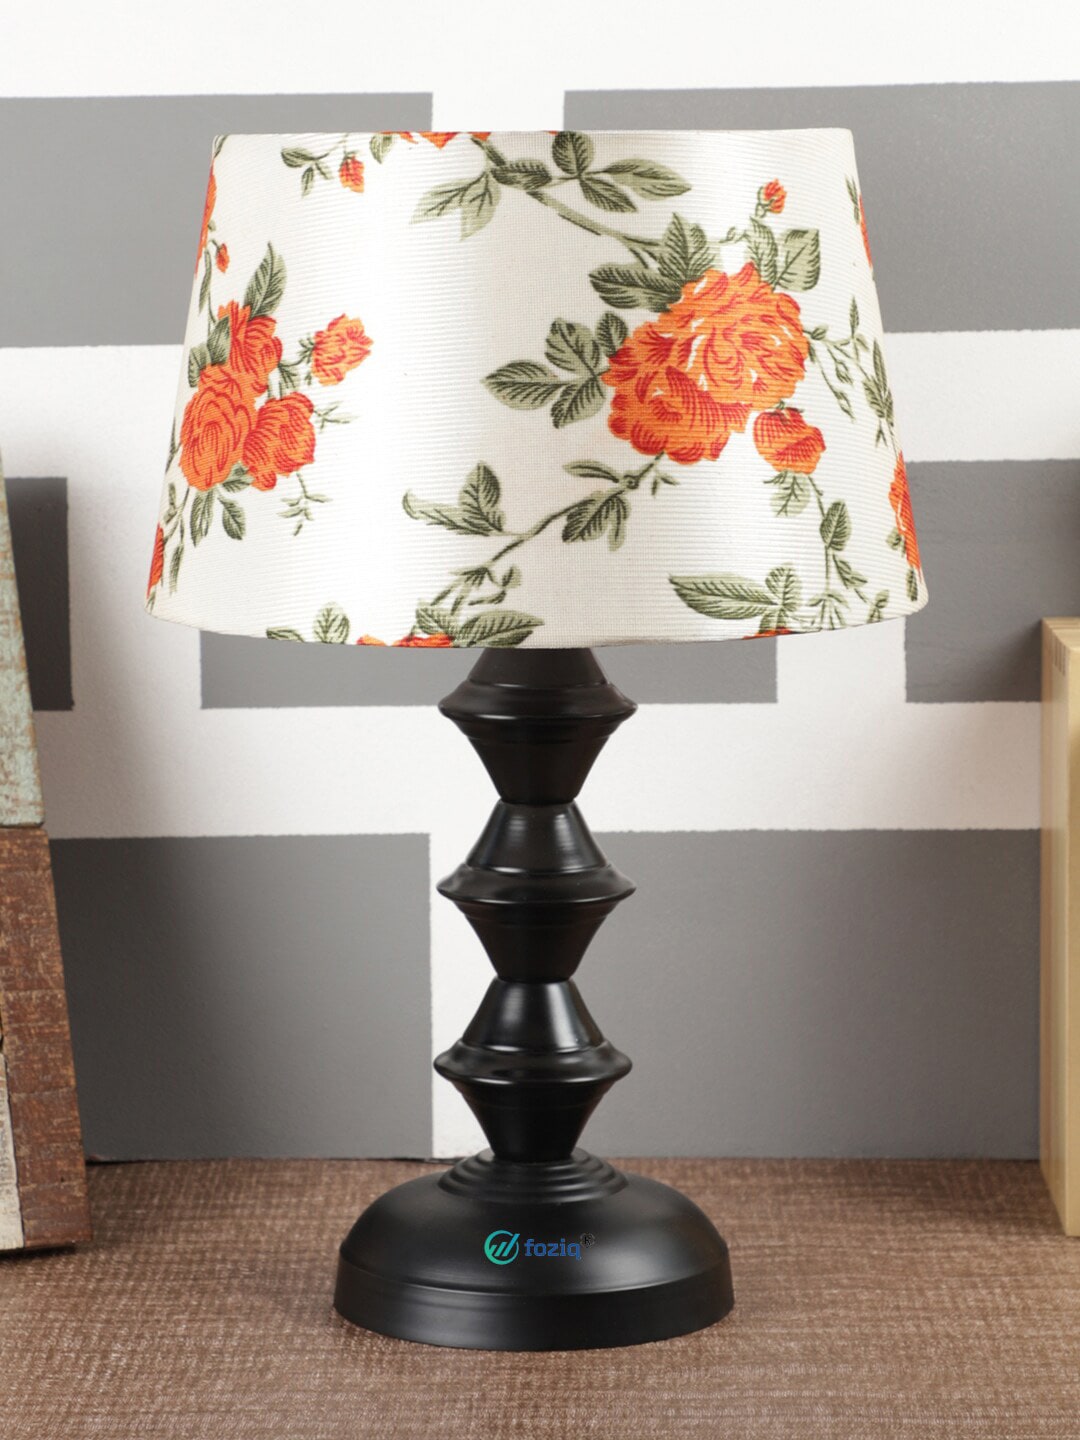 foziq Black & White Printed Country Table Lamp Price in India